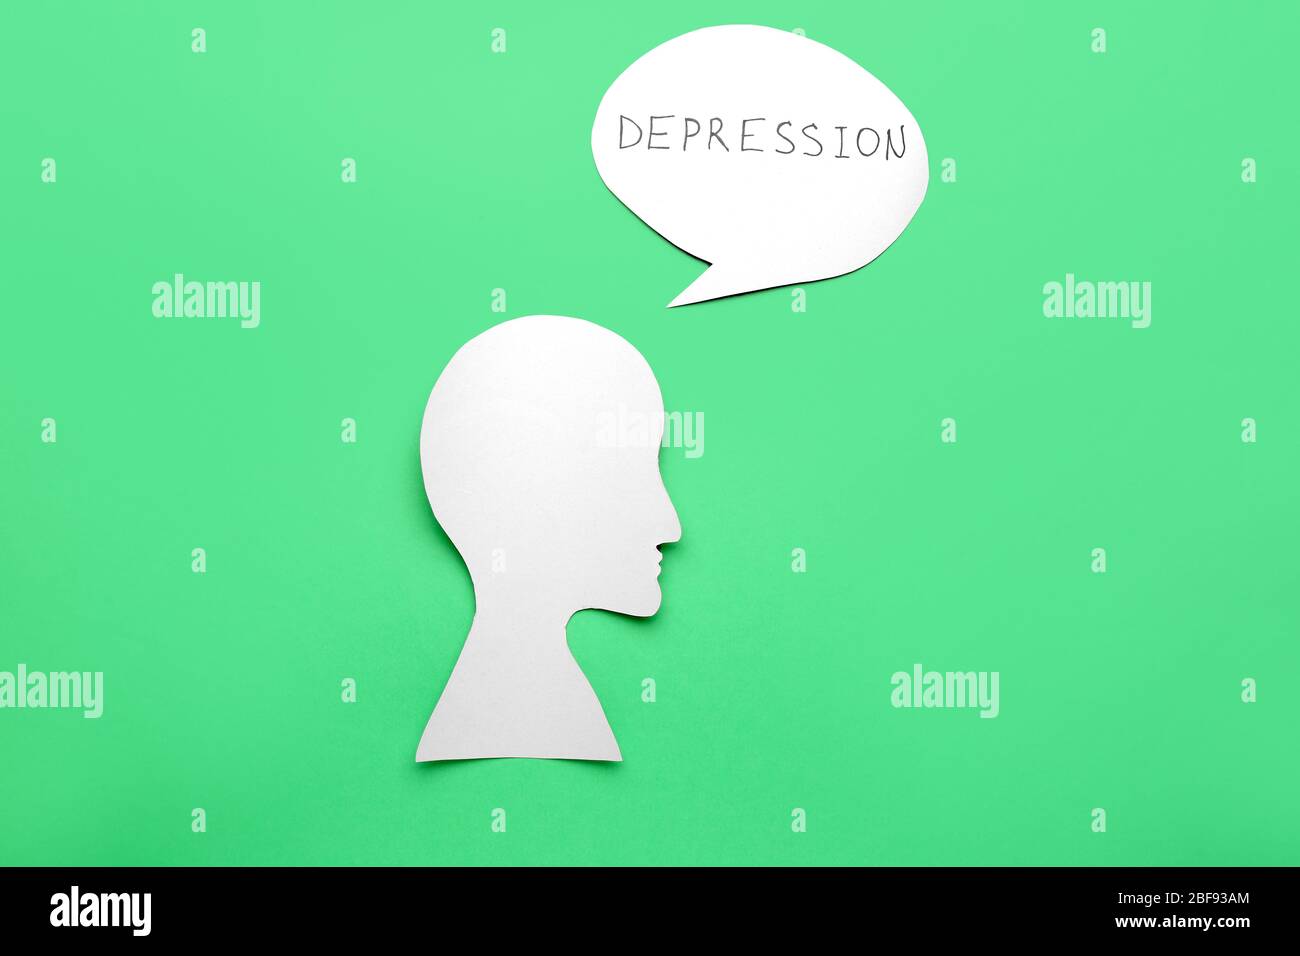 Human head and speech bubble with text DEPRESSION on color background Stock Photo